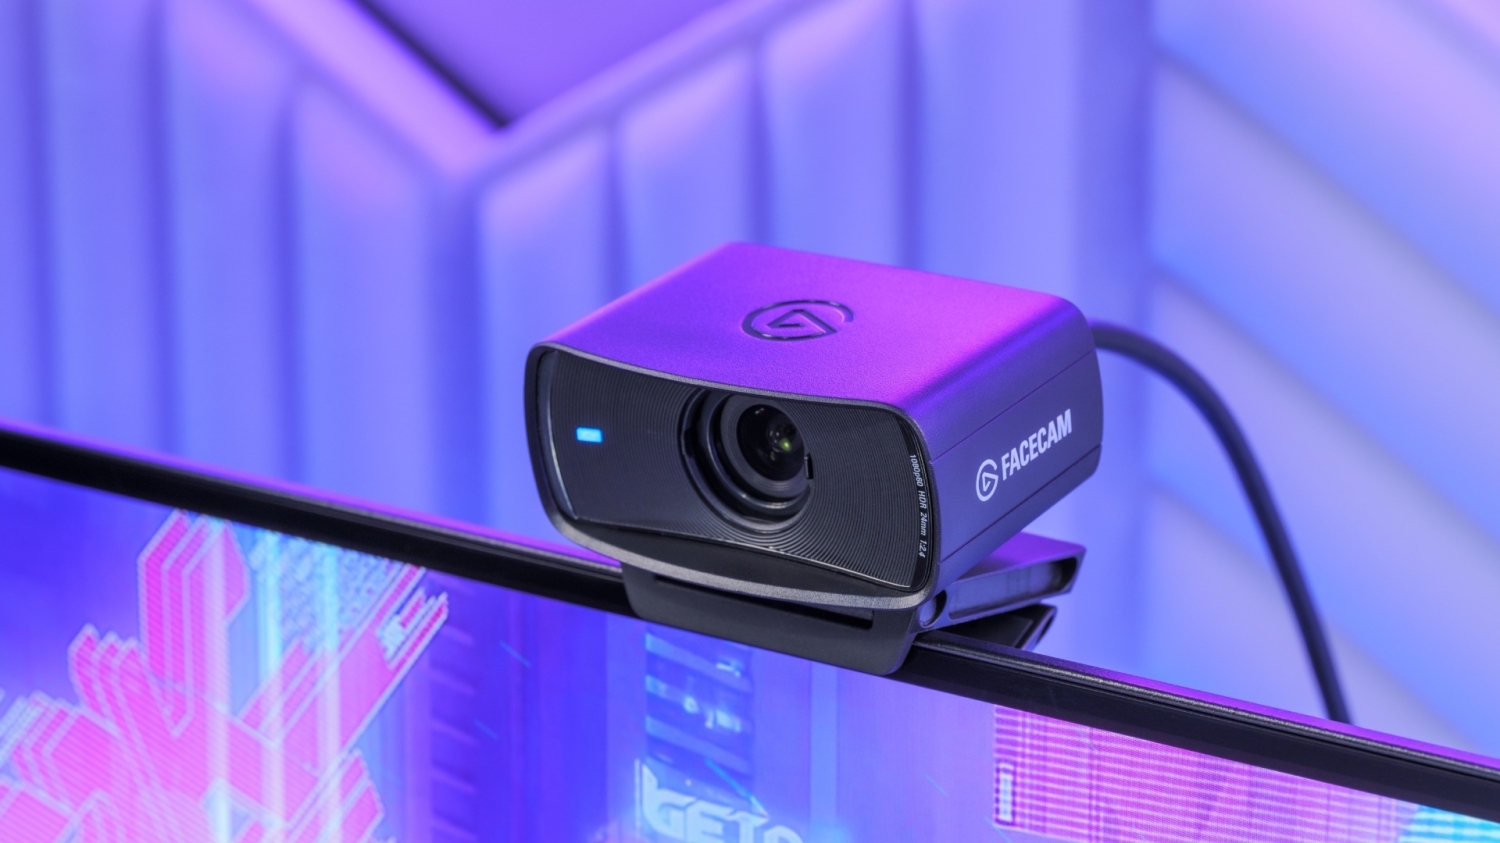 Elgato's new Facecam MK.2 adds new features and lowers the price of the  popular 1080p60 webcam